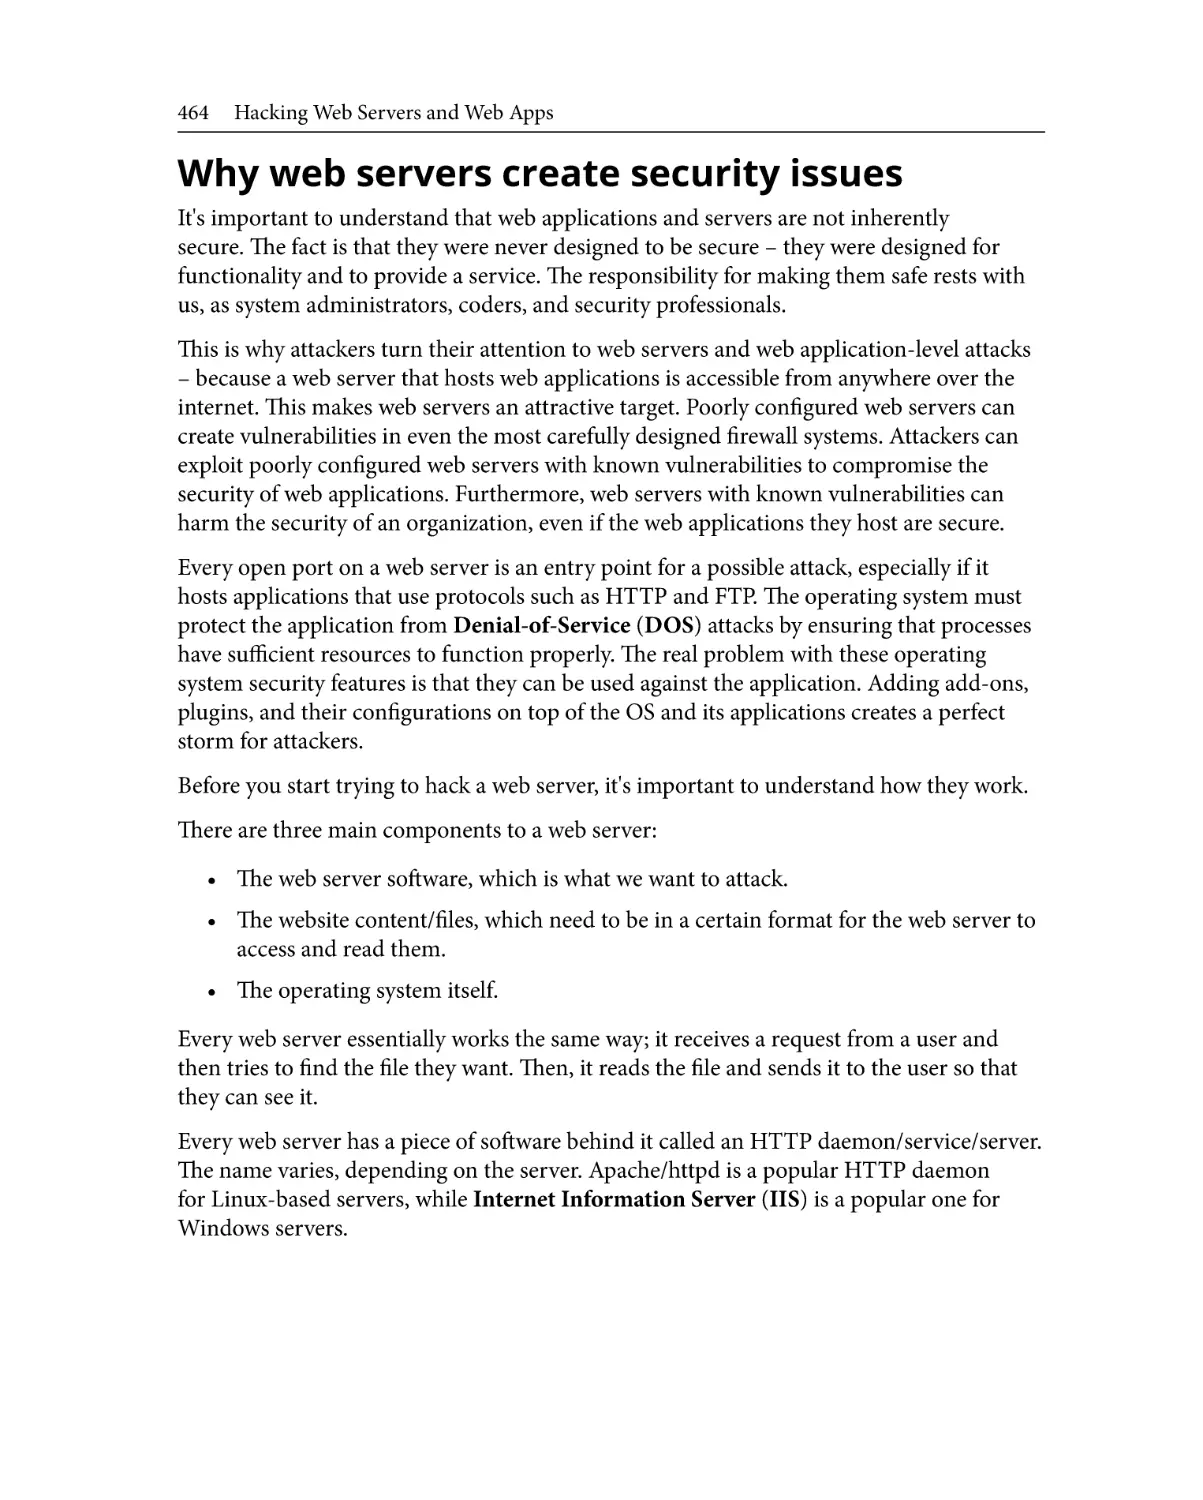 Why web servers create security issues